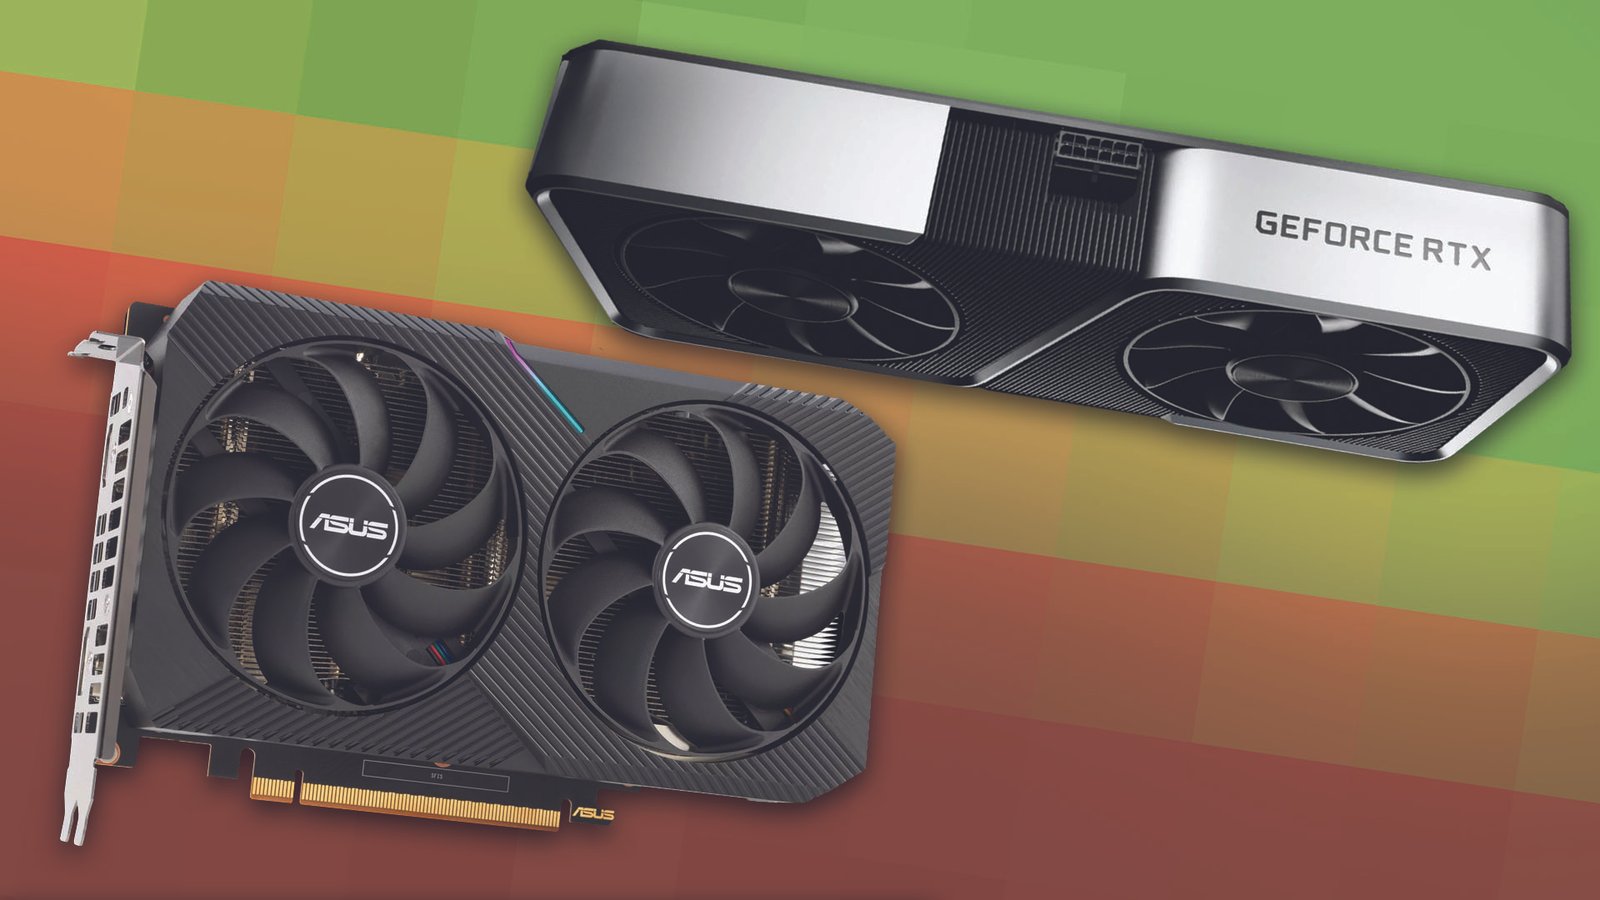 Now’s the time to hunt for a low-payment graphics card